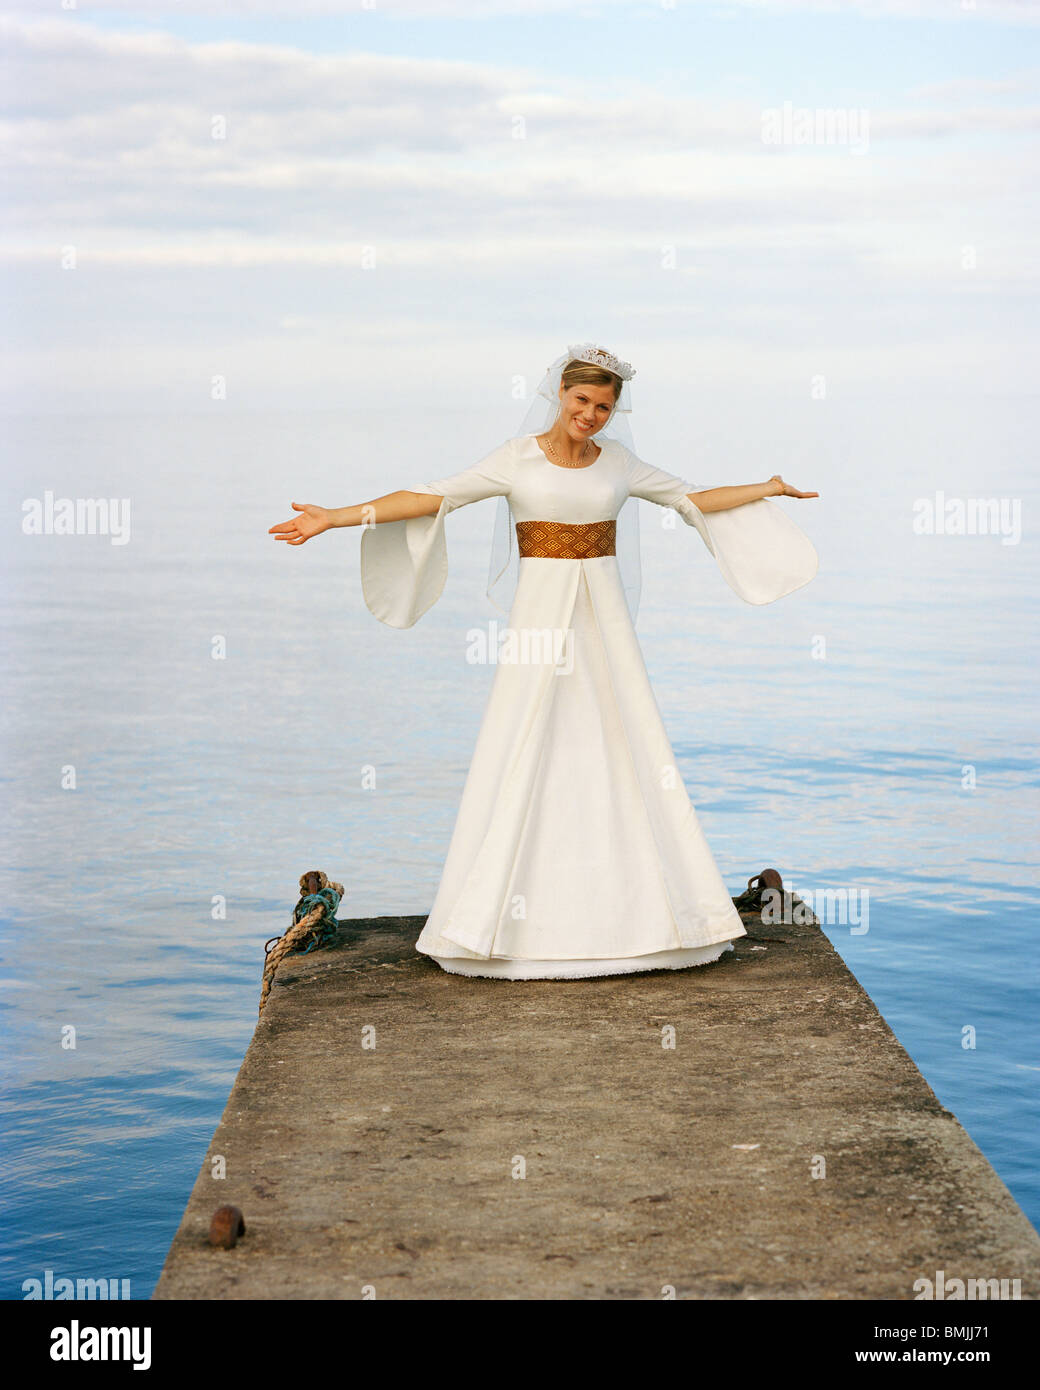 Scandinavia, Sweden, Oland, Bride standing on jetty arms outstretched, smiling, portrait Stock Photo